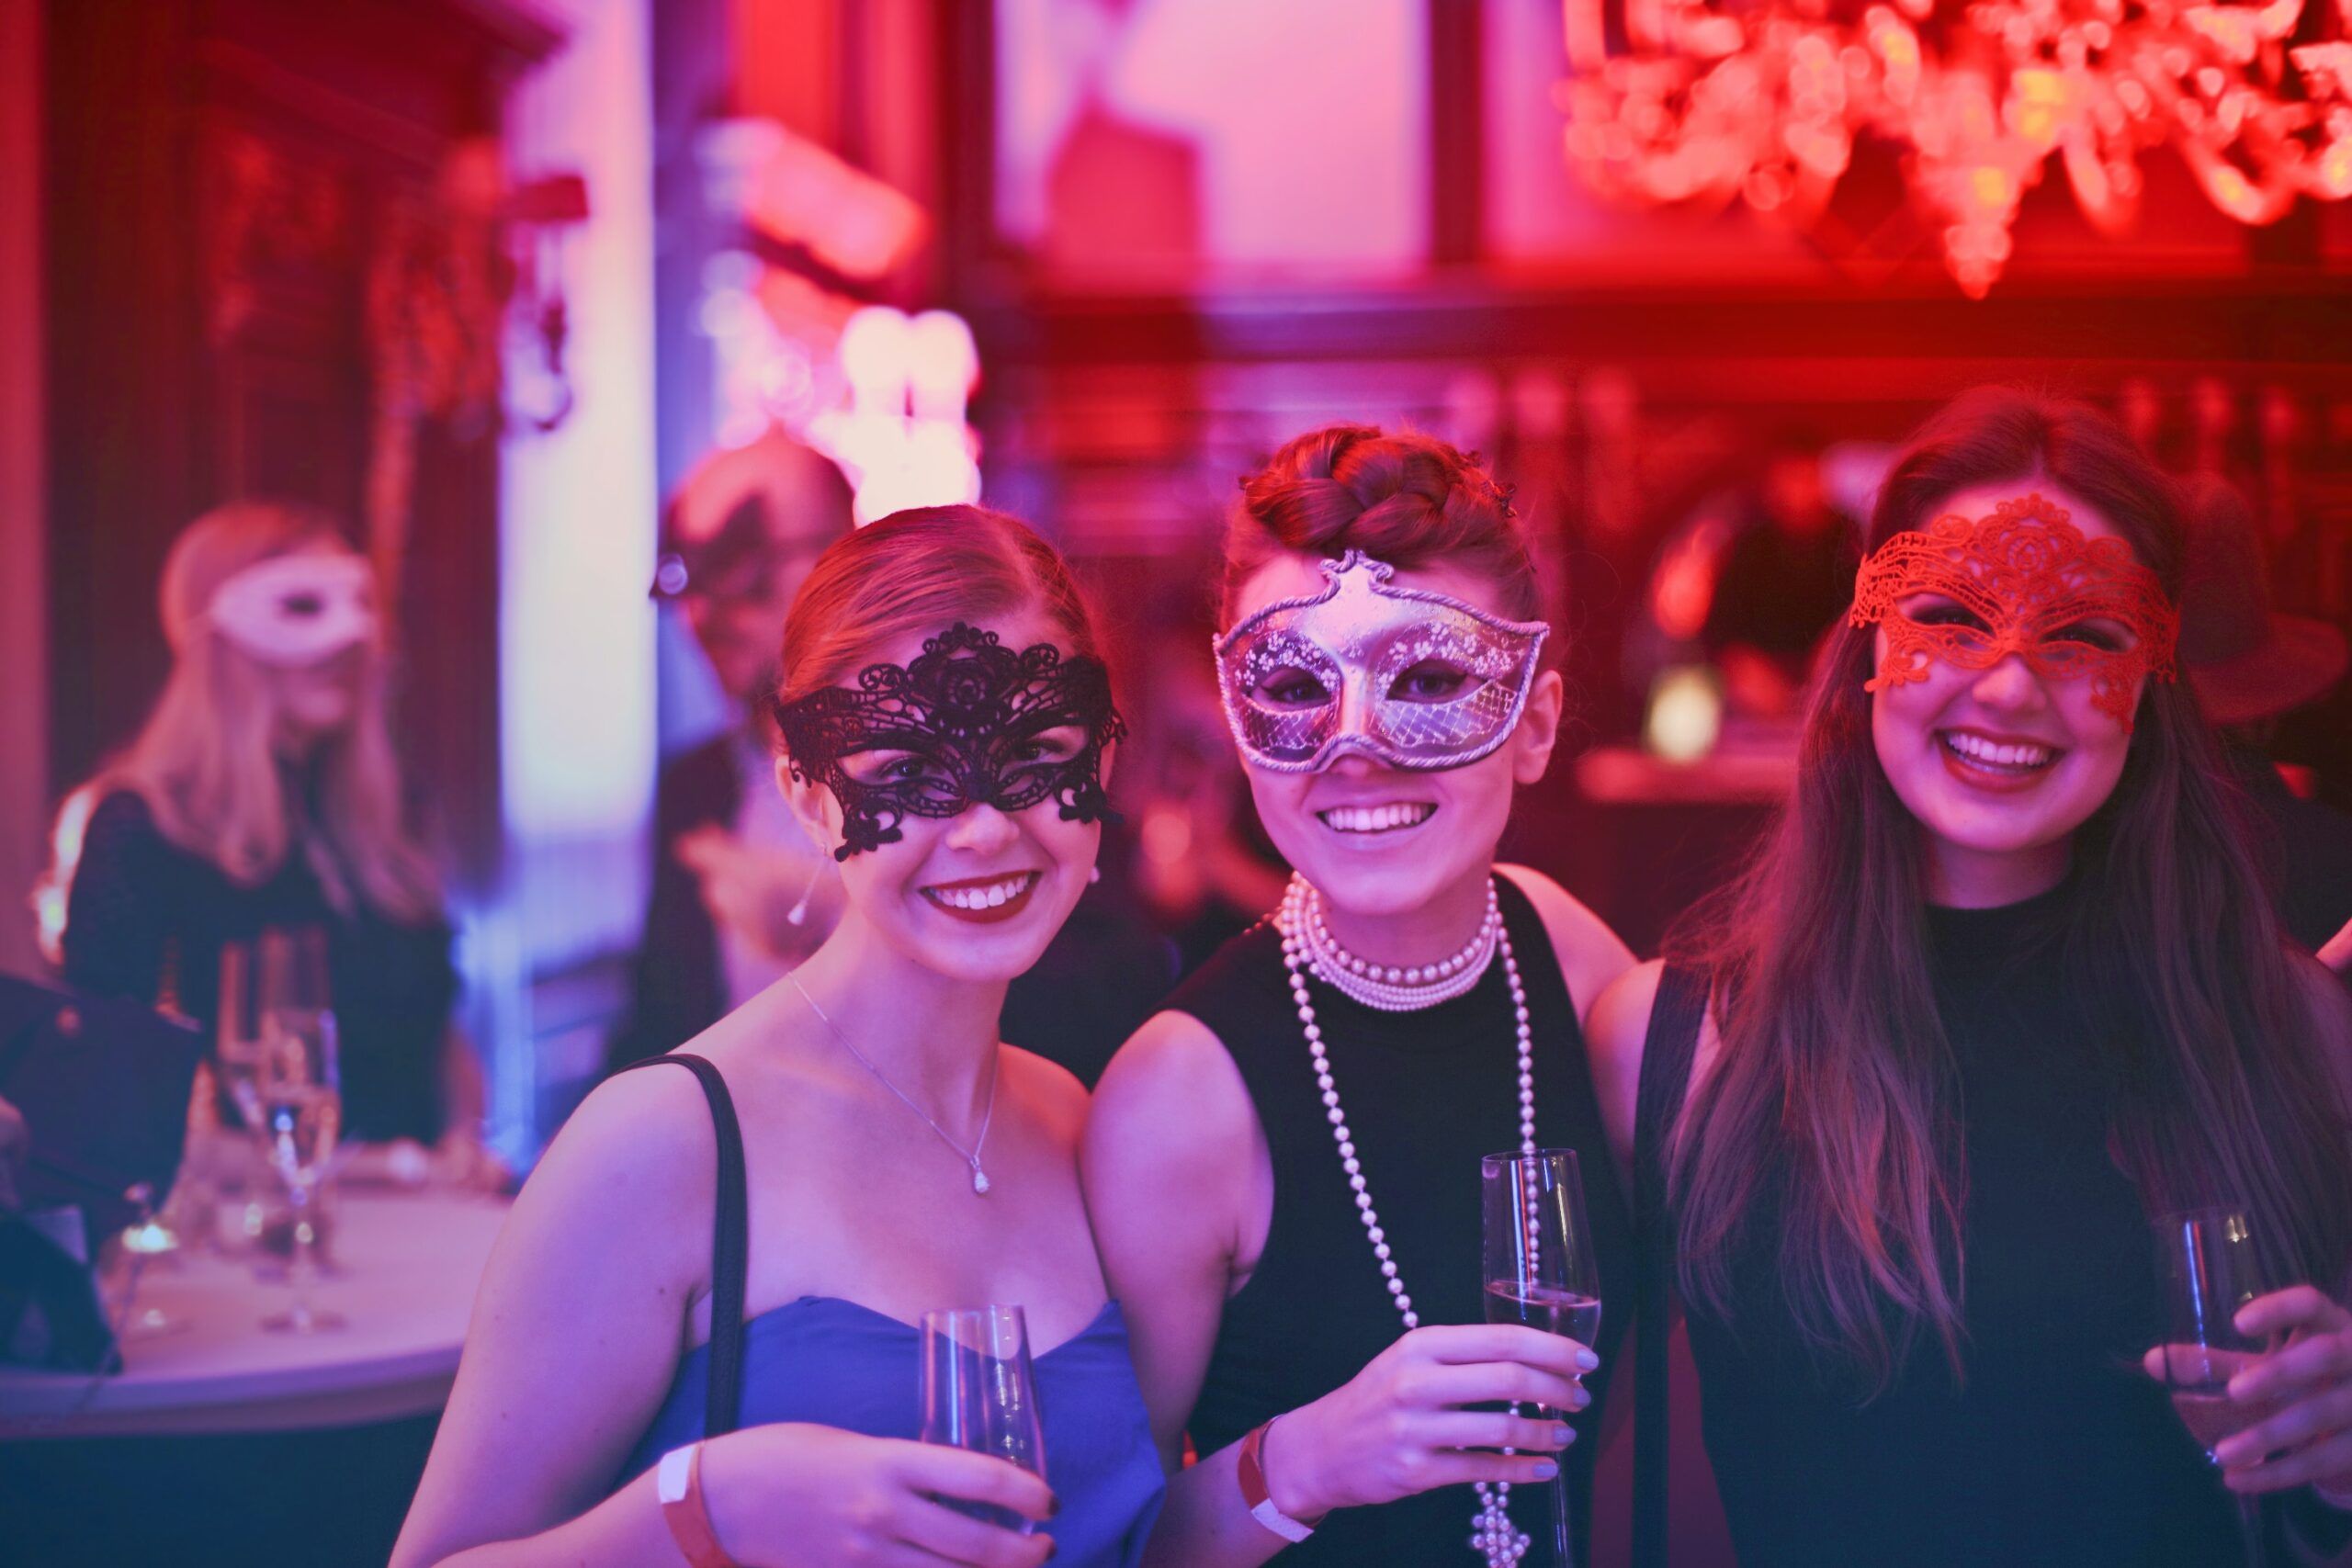 Photo by Andrea Piacquadio: https://www.pexels.com/photo/photo-of-women-wearing-masks-787961/